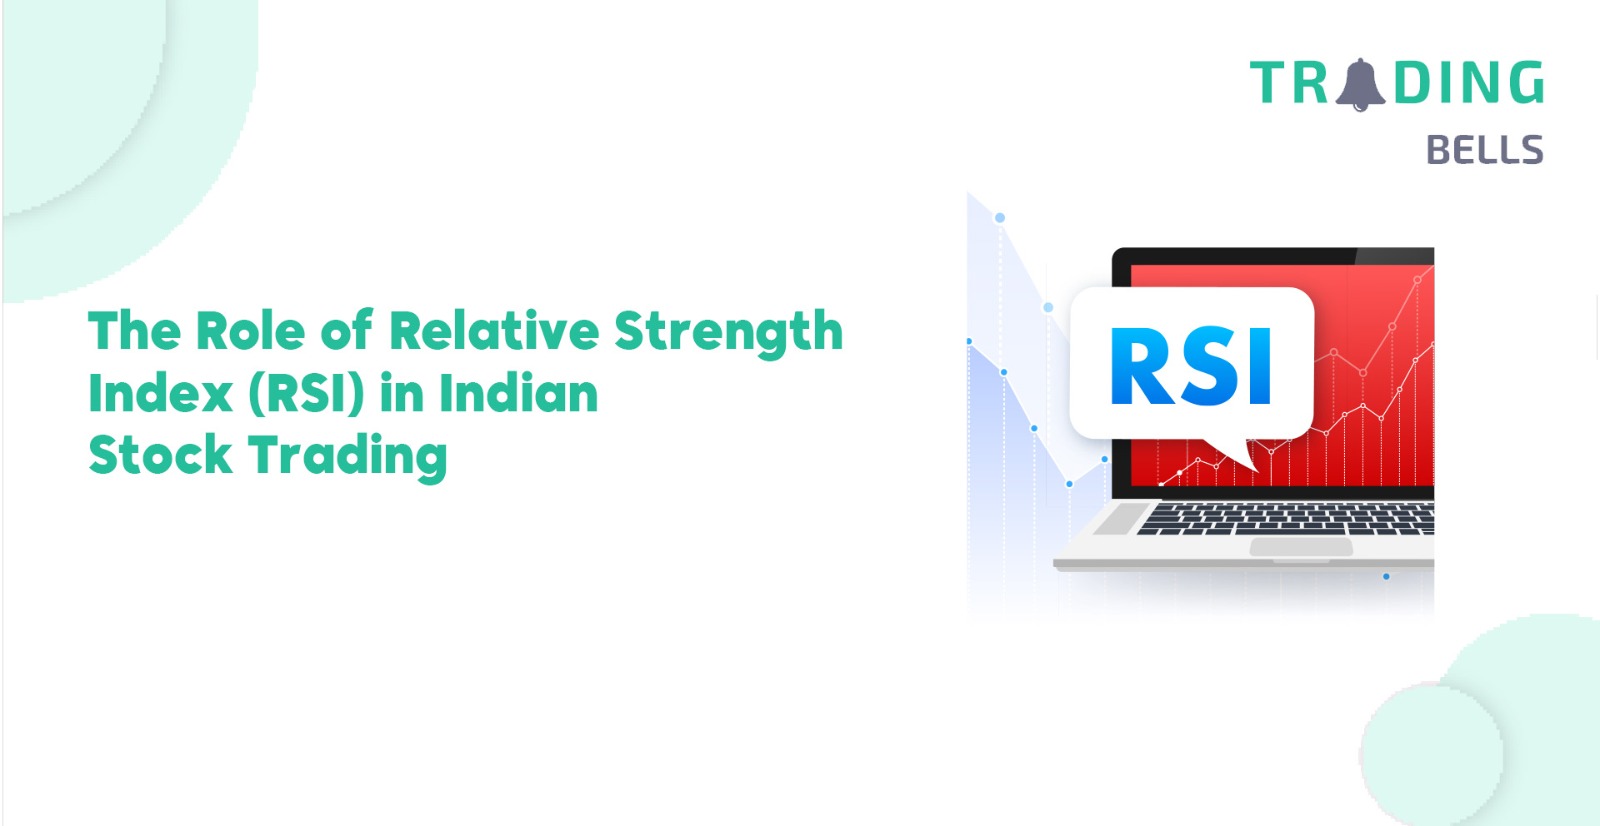 The Role of Relative Strength Index (RSI) in Indian Stock Trading